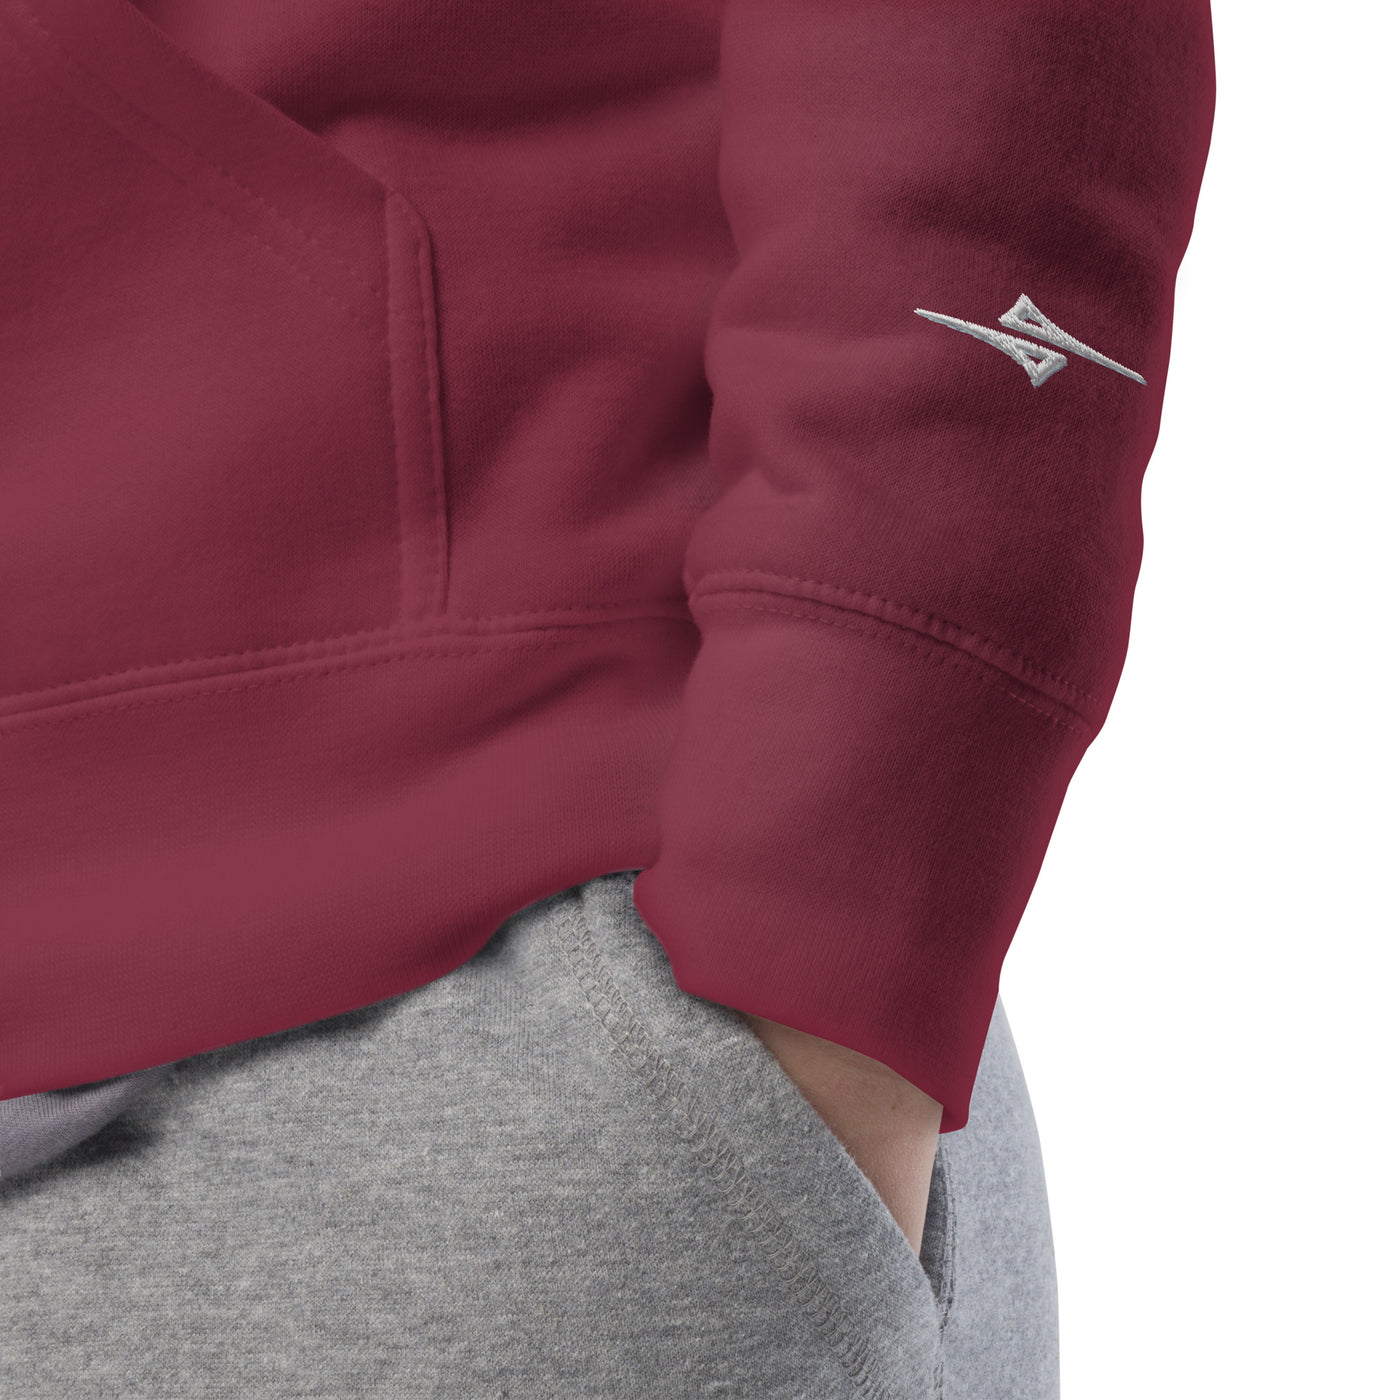  4iCe® Elite Boxing maroon embroidered hoodie details